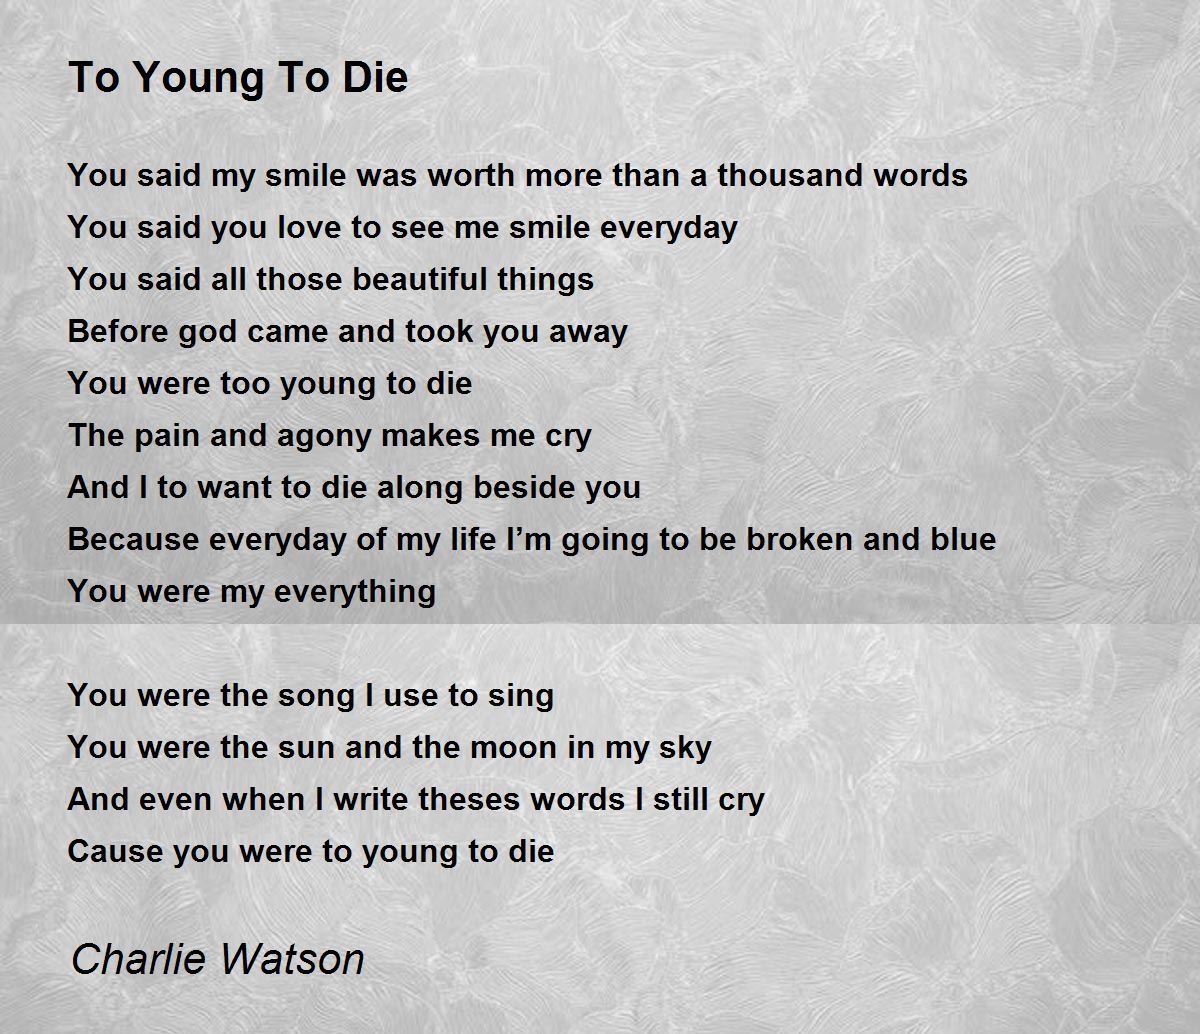 Are You Worth More Dead or Alive? - POEMS